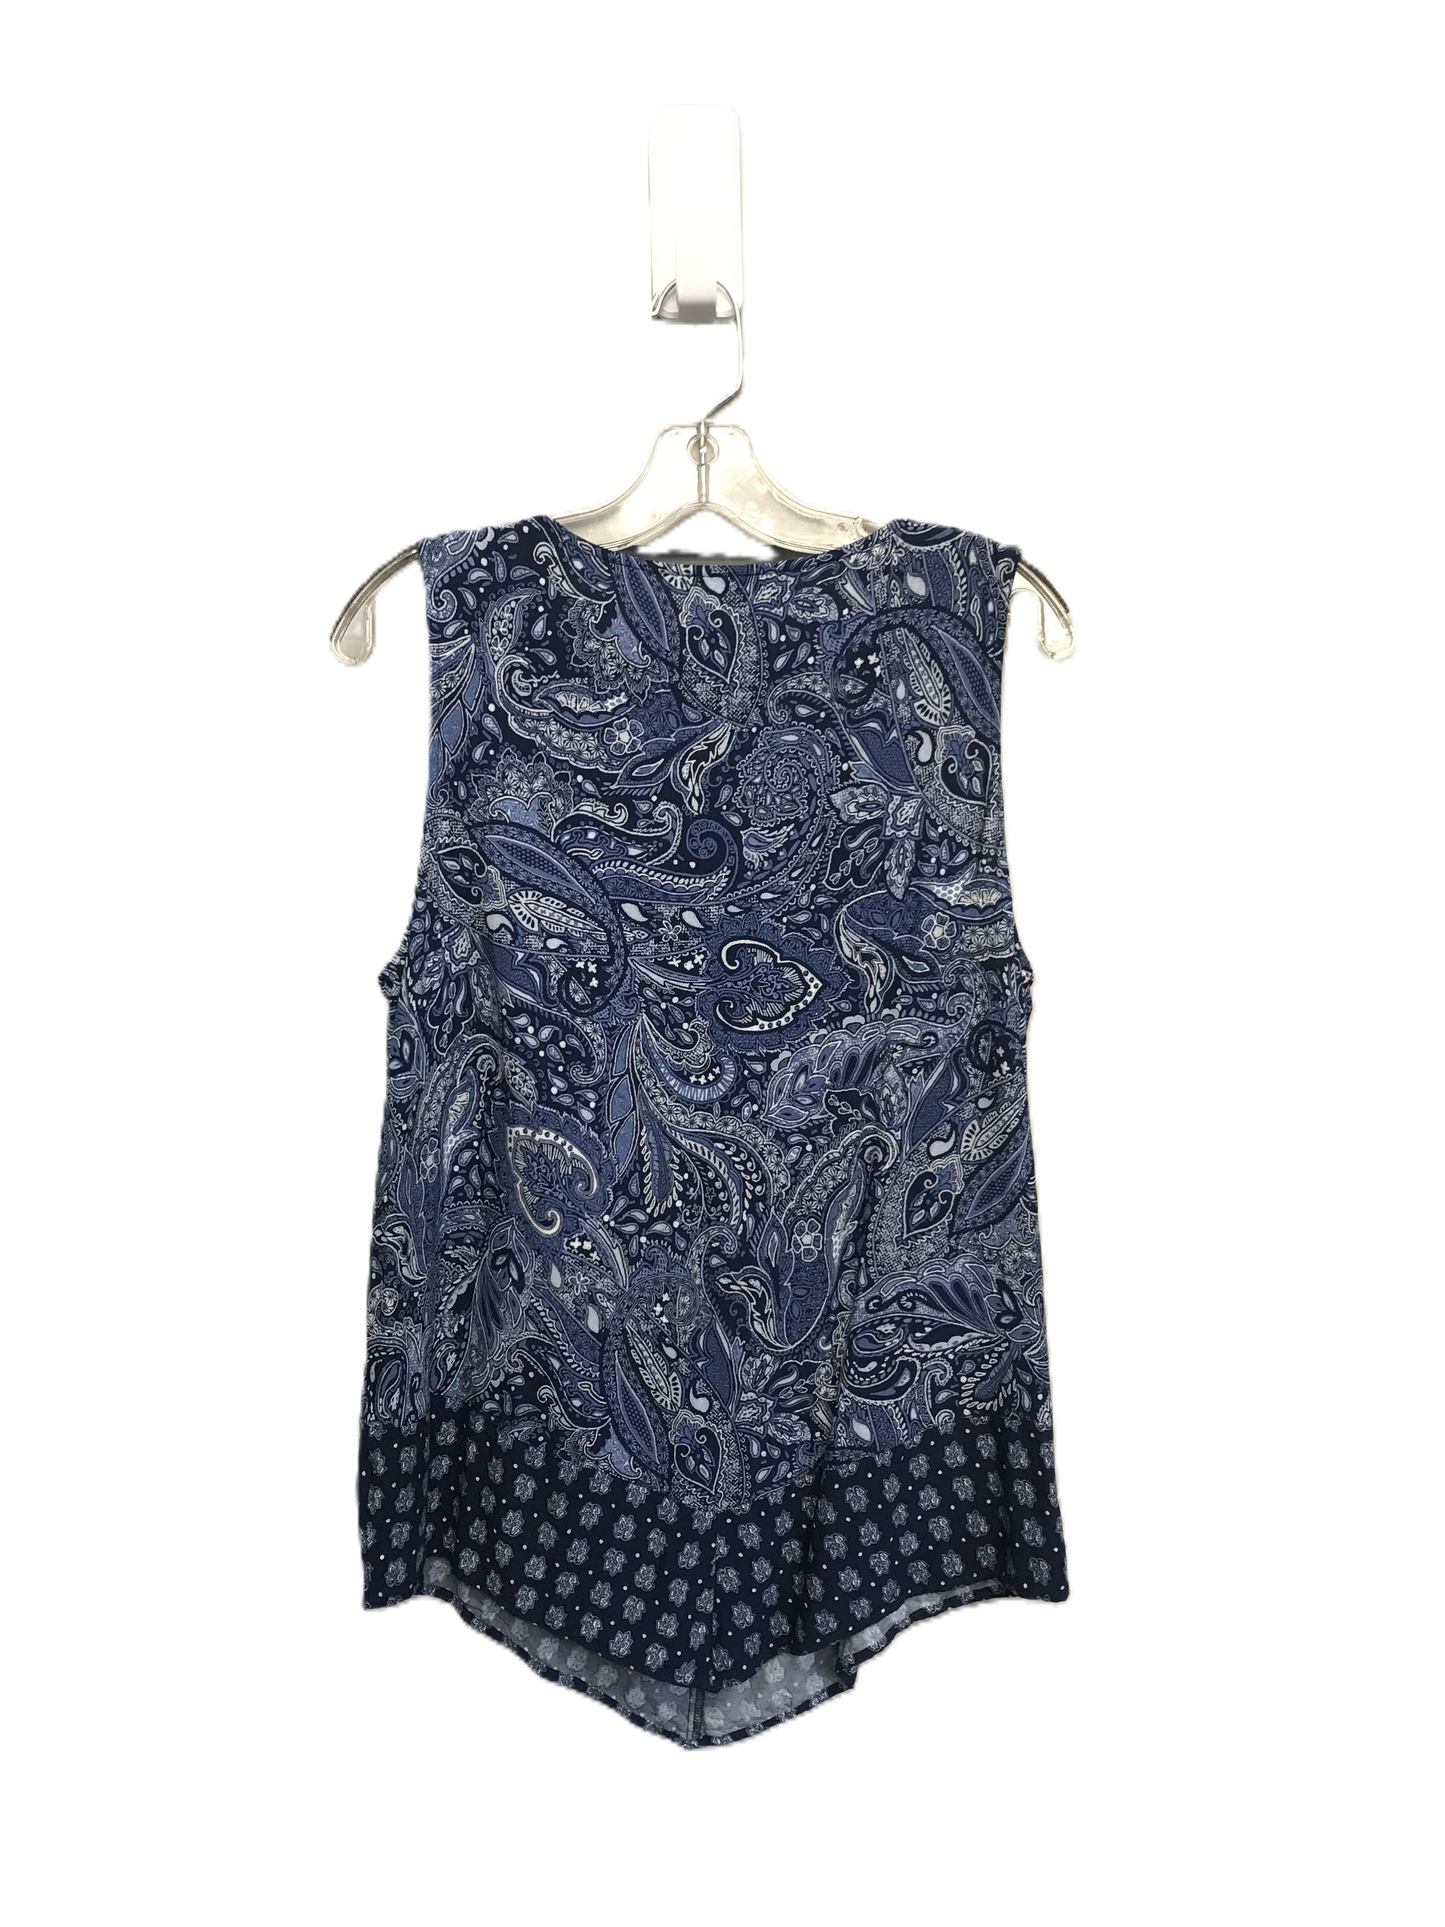 Blue Top Sleeveless By Westport, Size: L